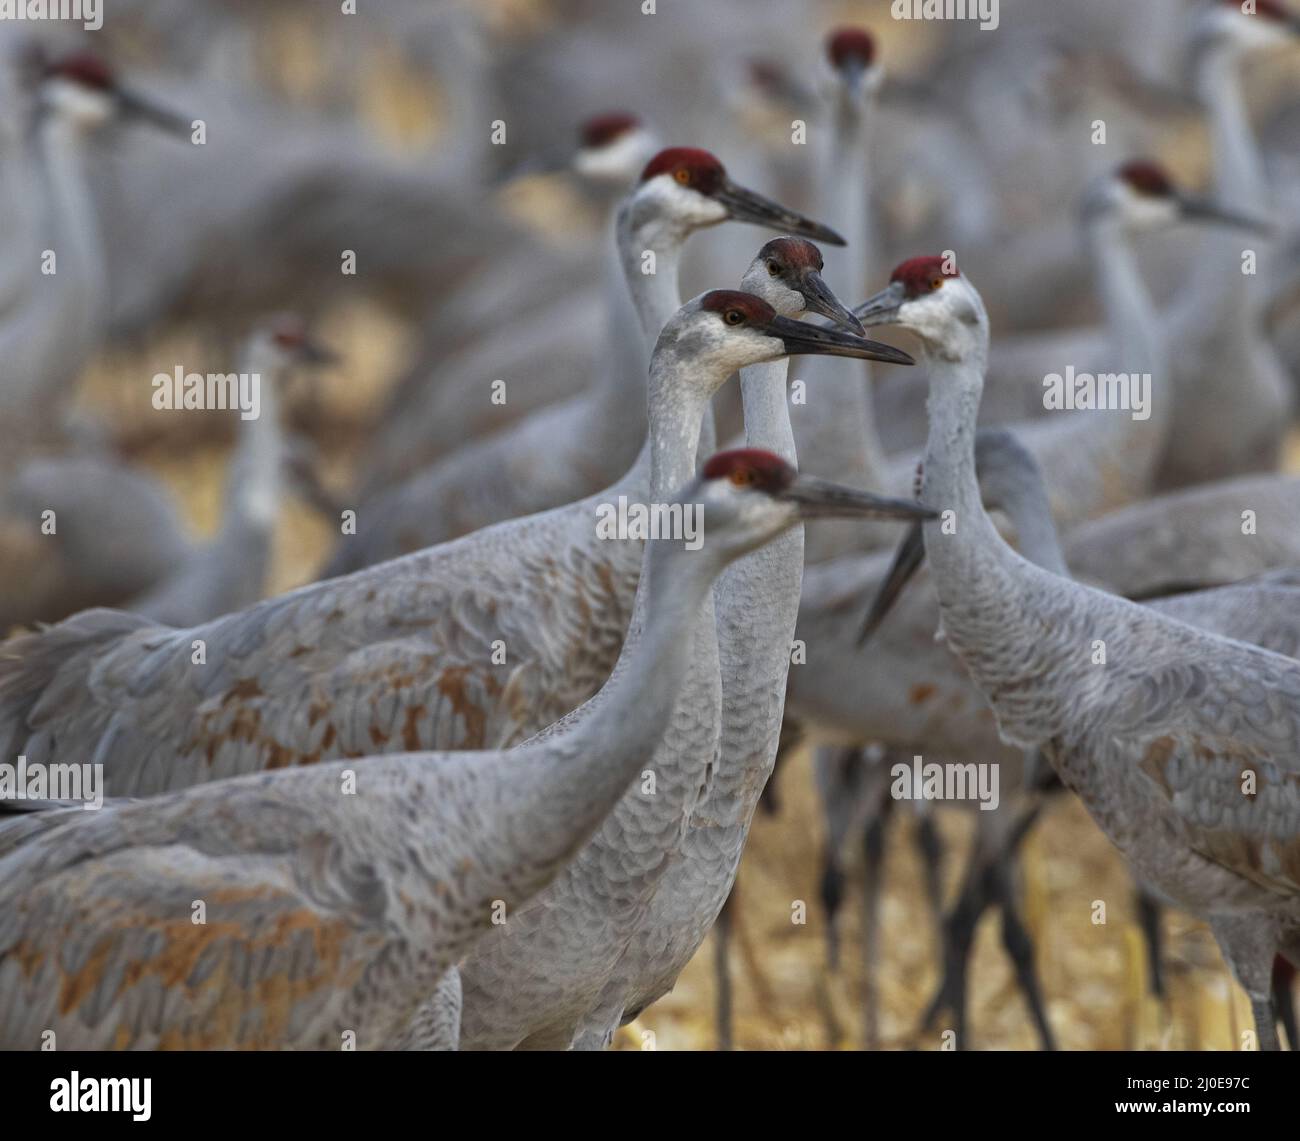 Concepts of unique individuality  seen in selective focus on one individual crane amid varying sharpness on surrounding other birds Stock Photo